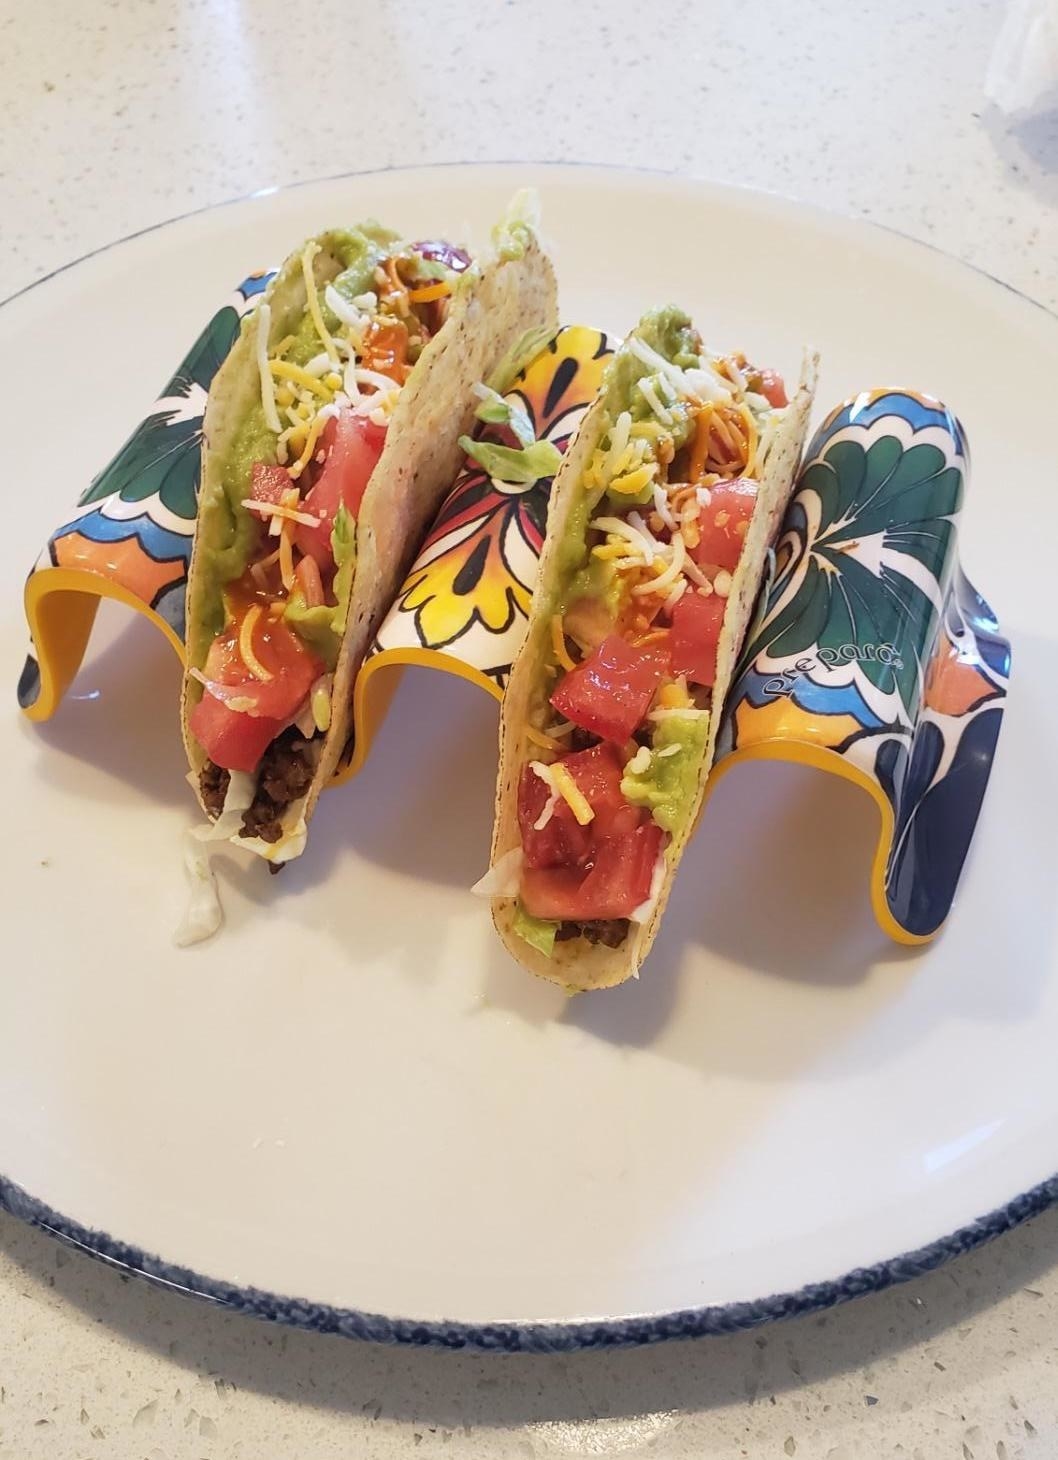 Two tacos in the multi-colored decorative taco holder